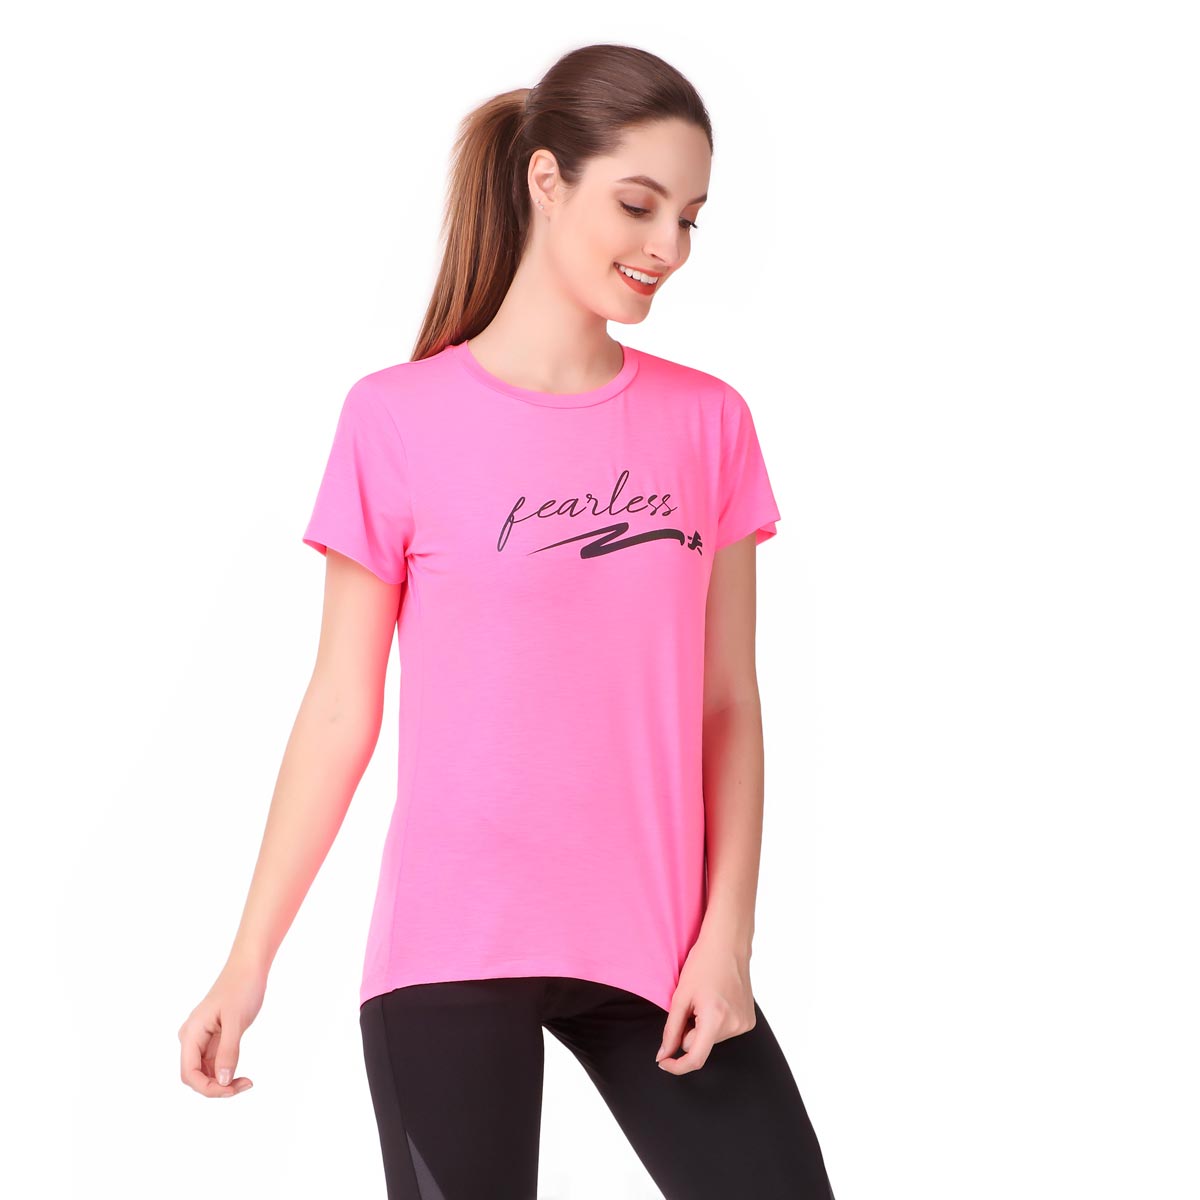 Performance Tshirt For Fearless Women (Neon Pink)